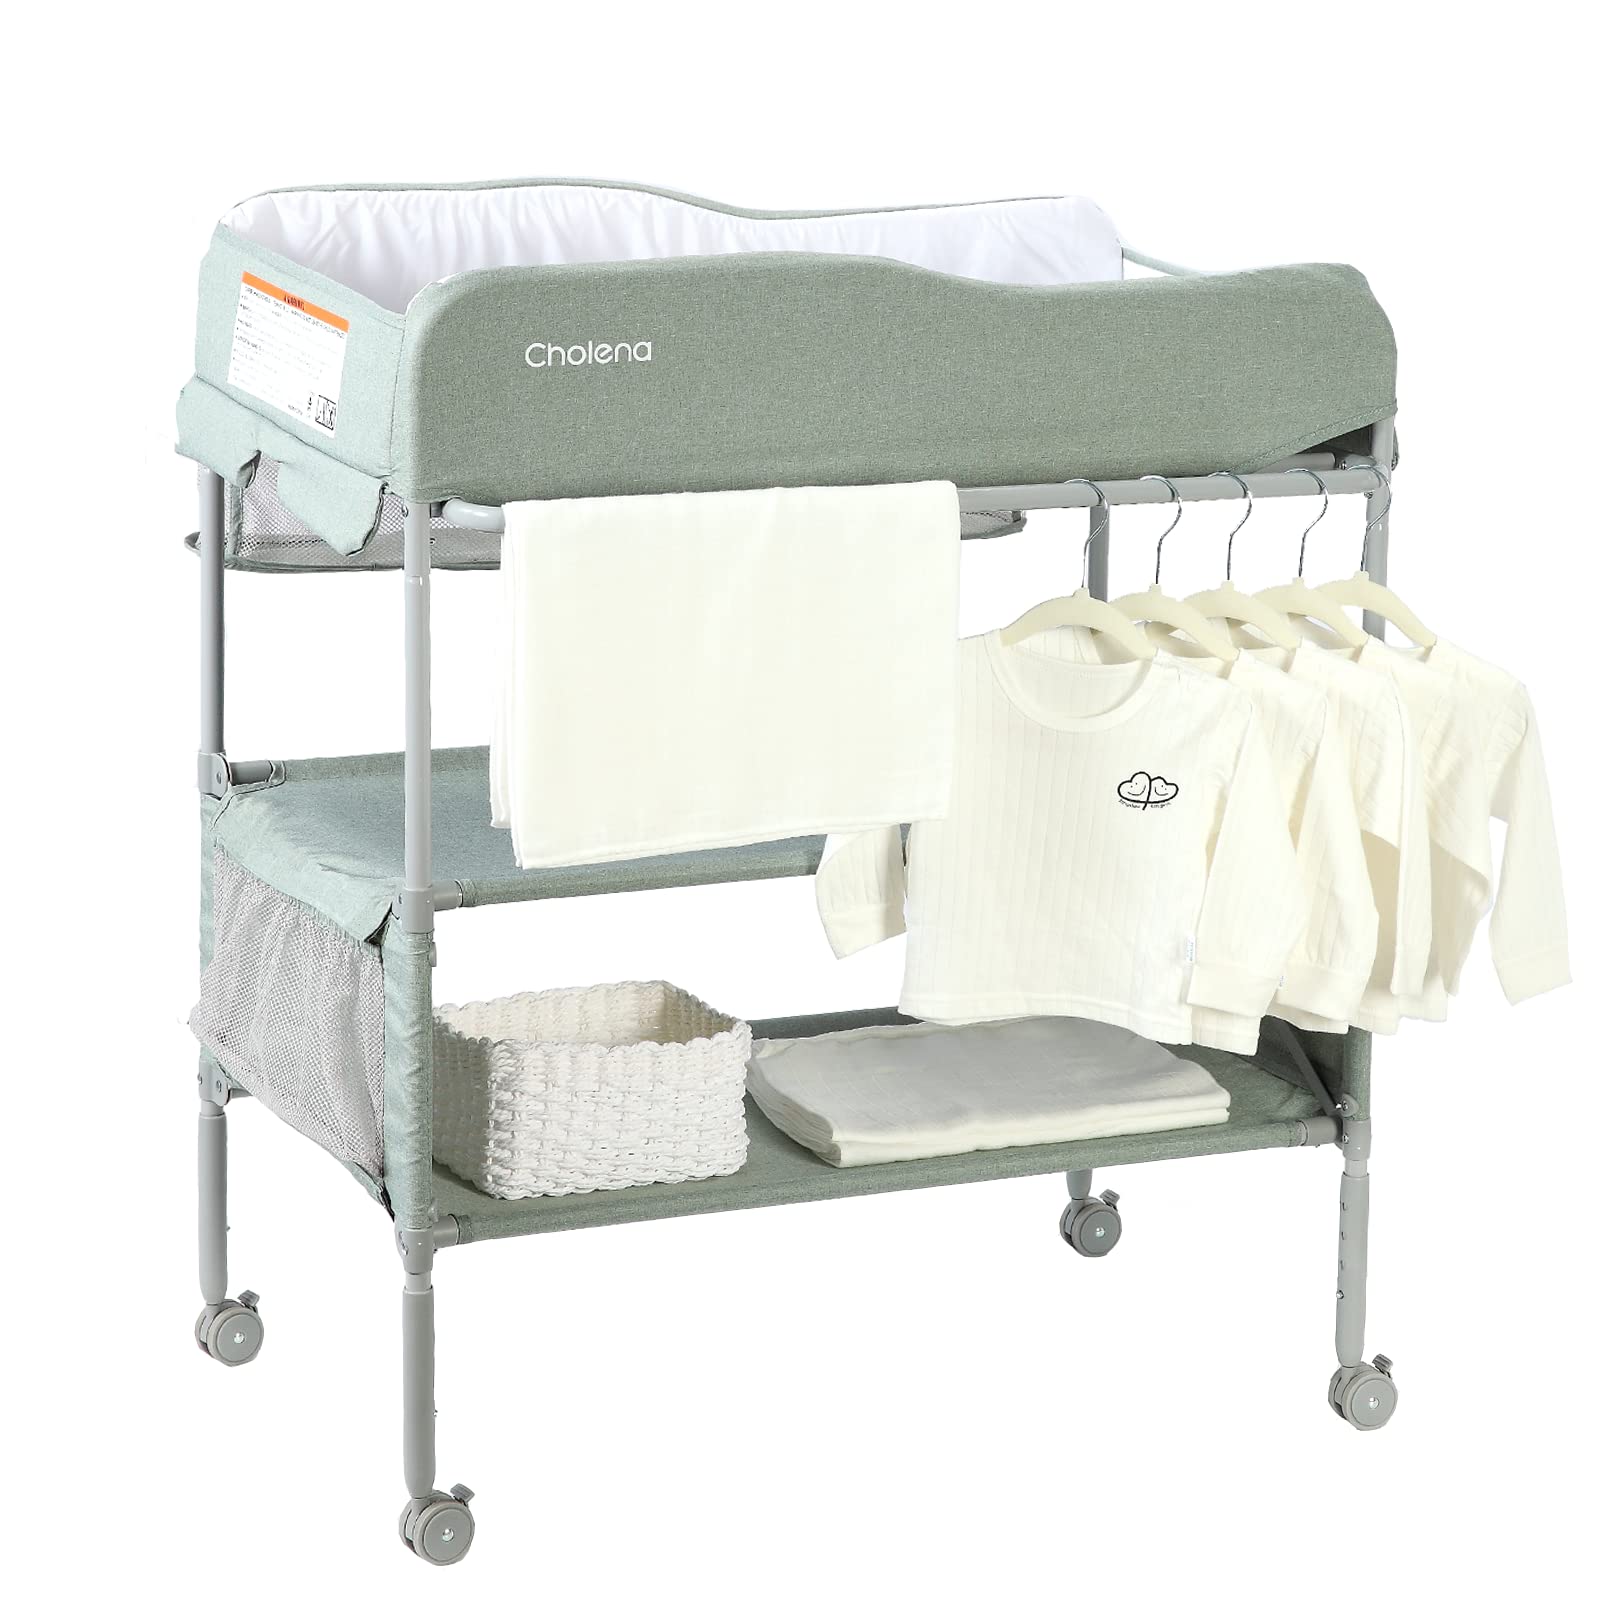 Baby Portable Changing Table,Foldable Diaper Changing Tables Adjustable Changing Station for Tall, Easy Clean Changing Table Topper,Large Storage Cholena Changing Station for Nursery,Green